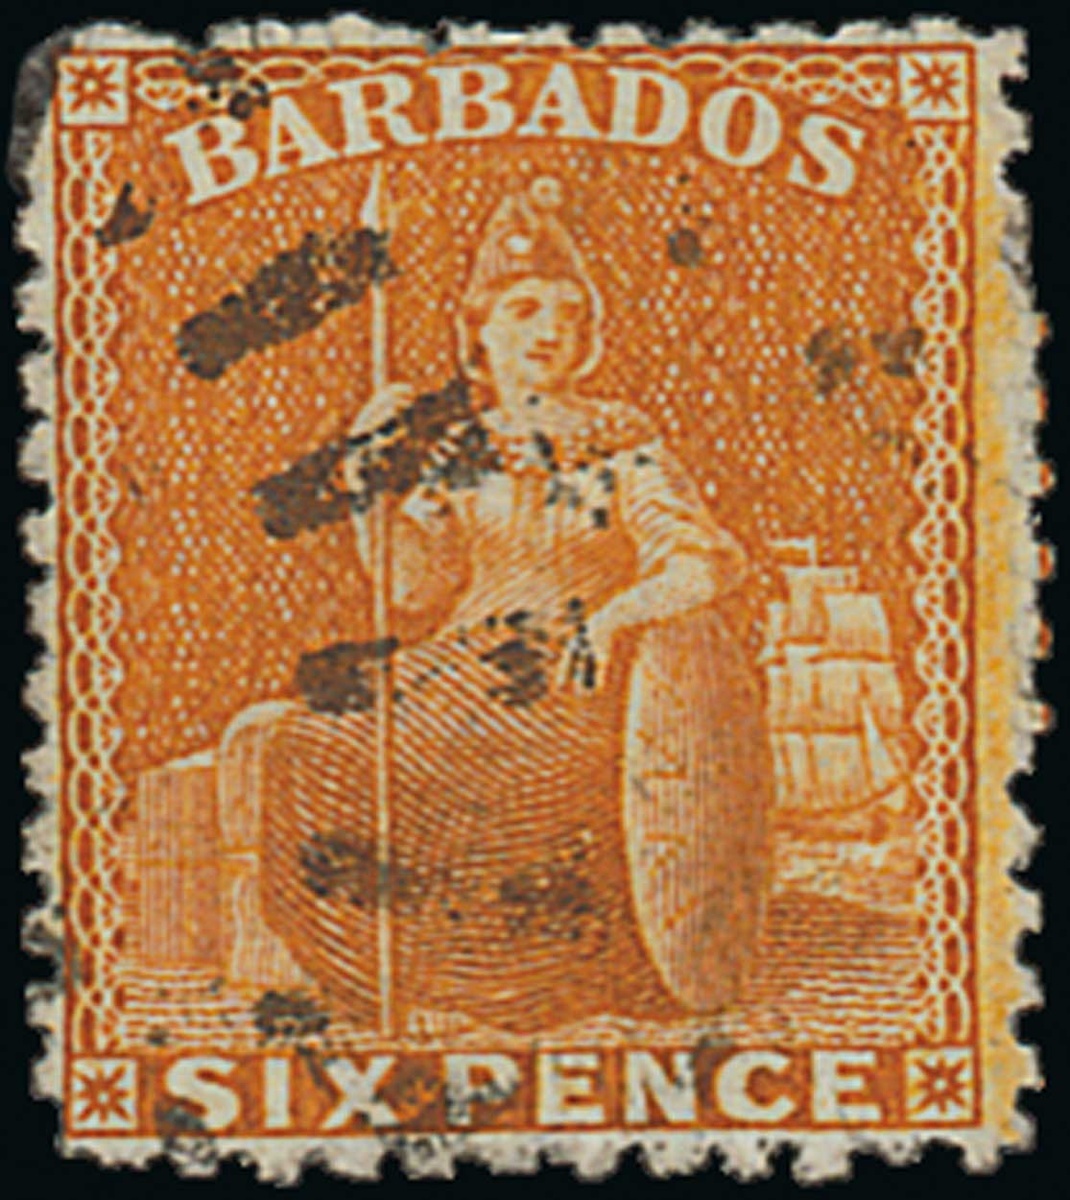 Barbados 1875 Watermark Crown CC, Perf. 12½ Issue 6d. chrome yellow with watermark upright,